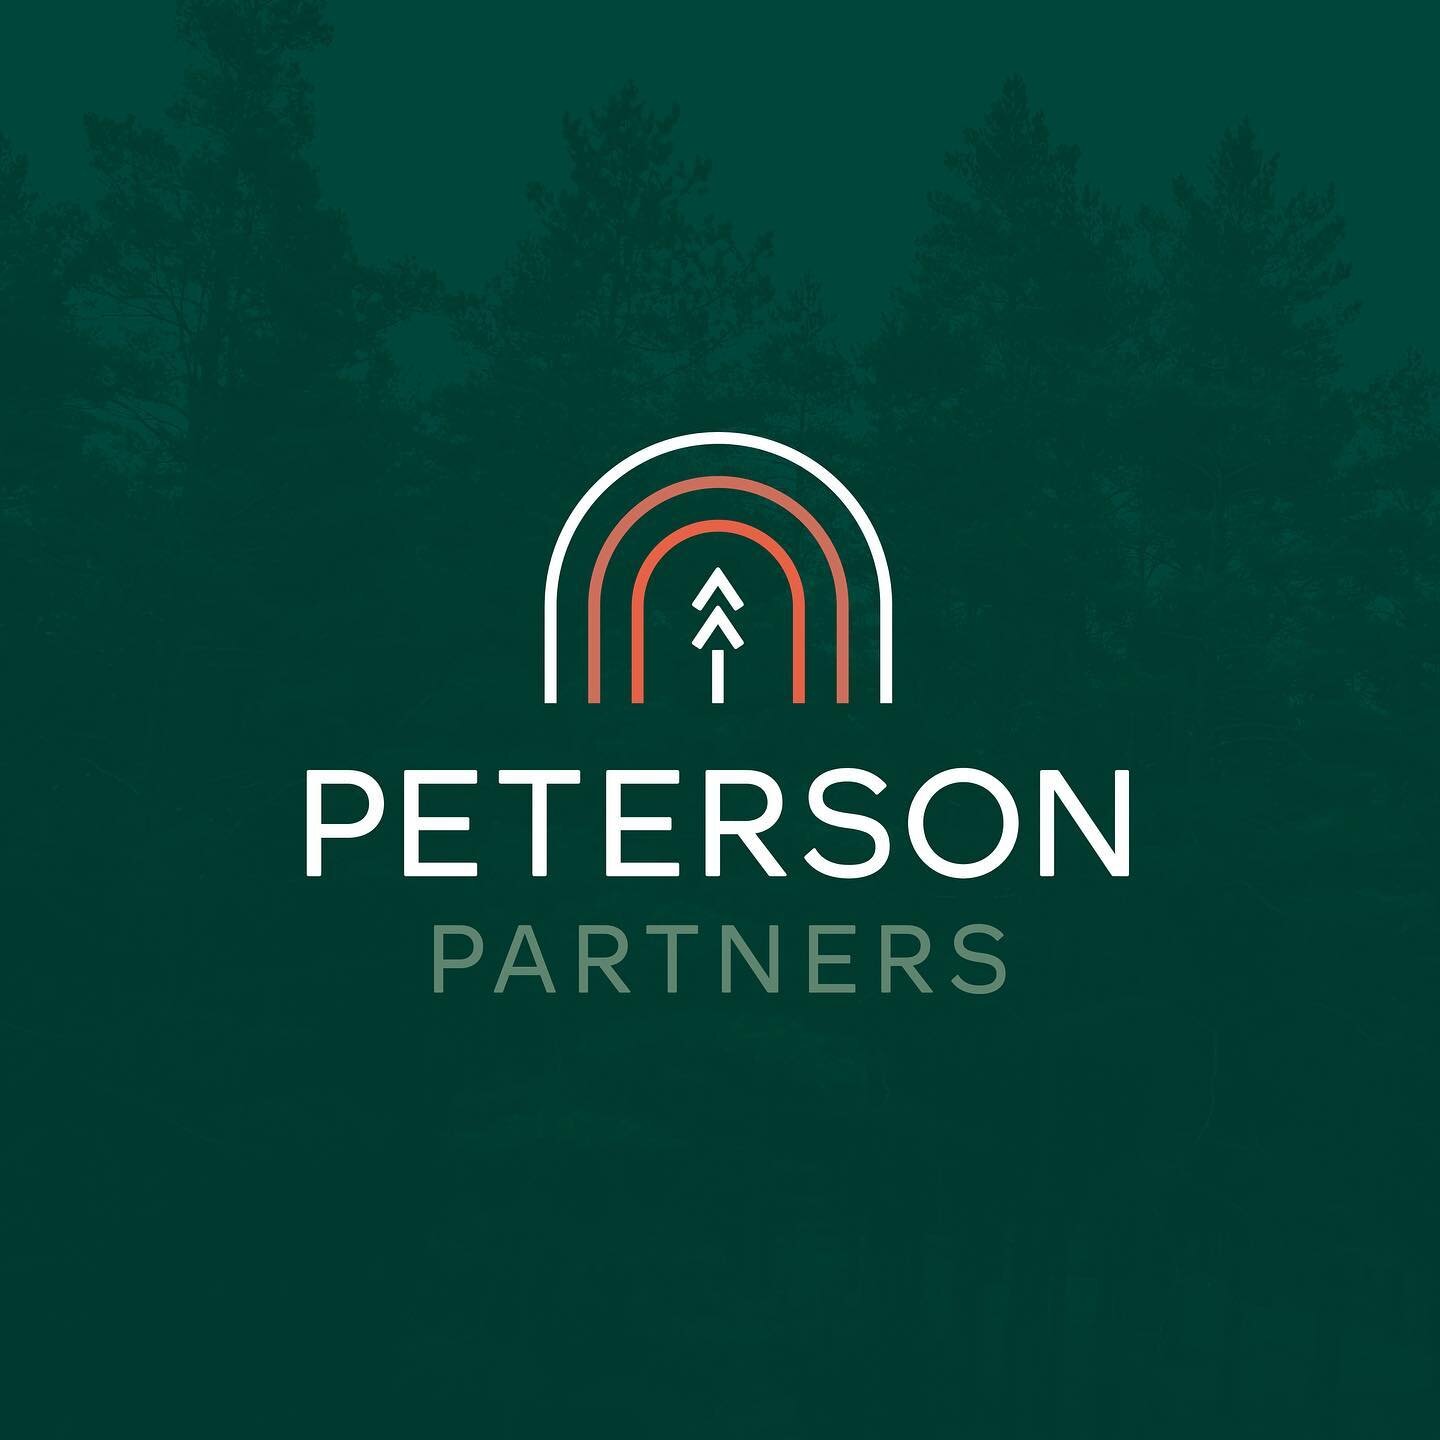 I&rsquo;m SO excited to highlight July&rsquo;s brand identity design &amp; web client - Peterson Partners, LLC! 🤩 Happy launch day, Peterson Partners! We built this brand from the ground up with a full Brand Identity Design &amp; Web project package